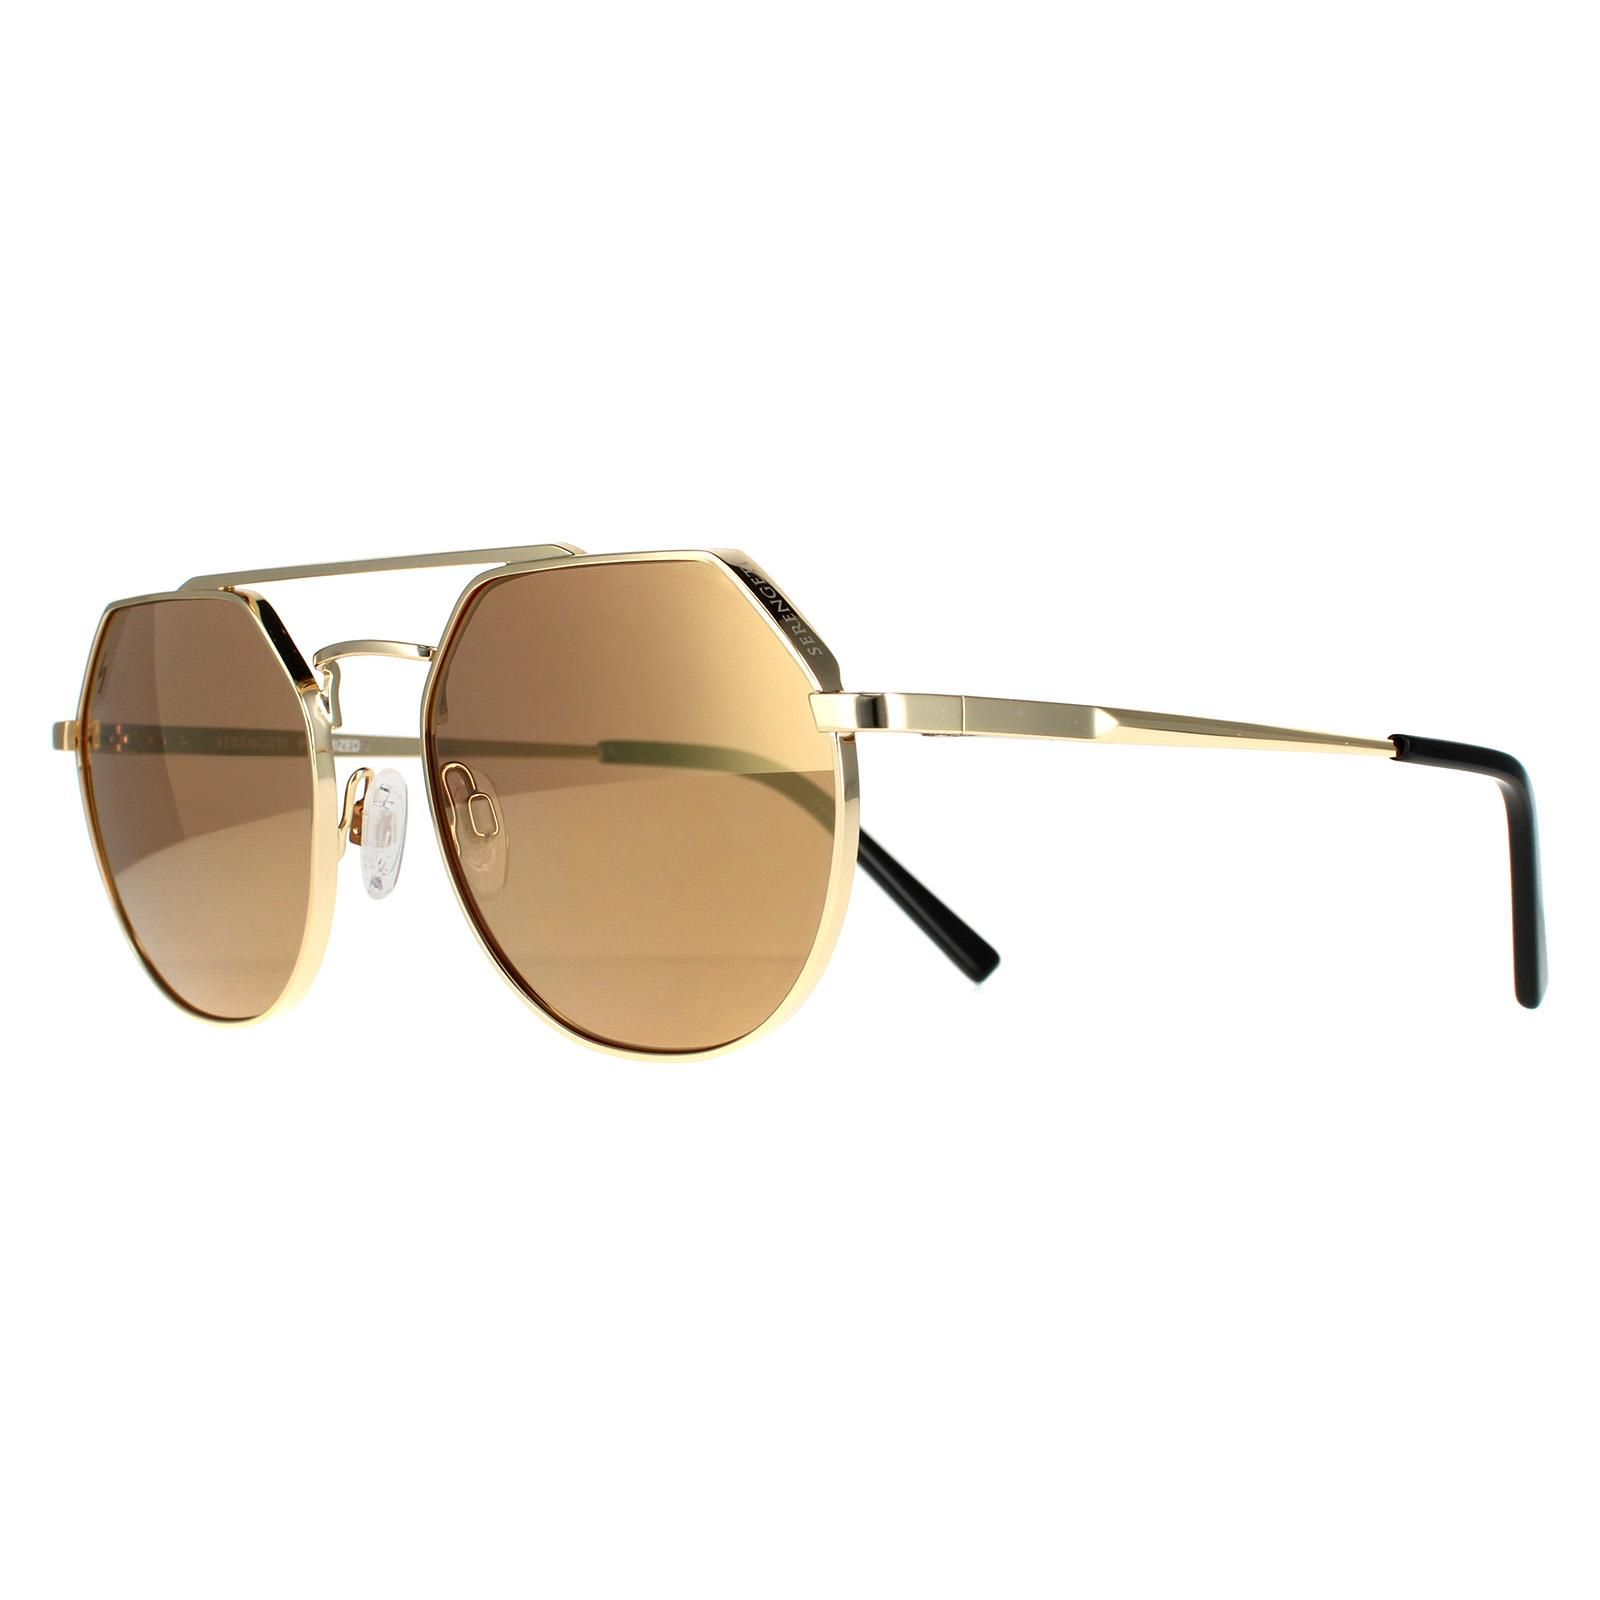 Serengeti Aviator Unisex Shiny Light Gold Saturn Drivers Gold Polarized Shelby  Shelby are lightweight metal pilot style with a geometric top frame design. Spring hinges and adjustable nose pieces give added comfort. Serengeti's amazing photochromic lenses which adapt to different light conditions complete the awesome package.